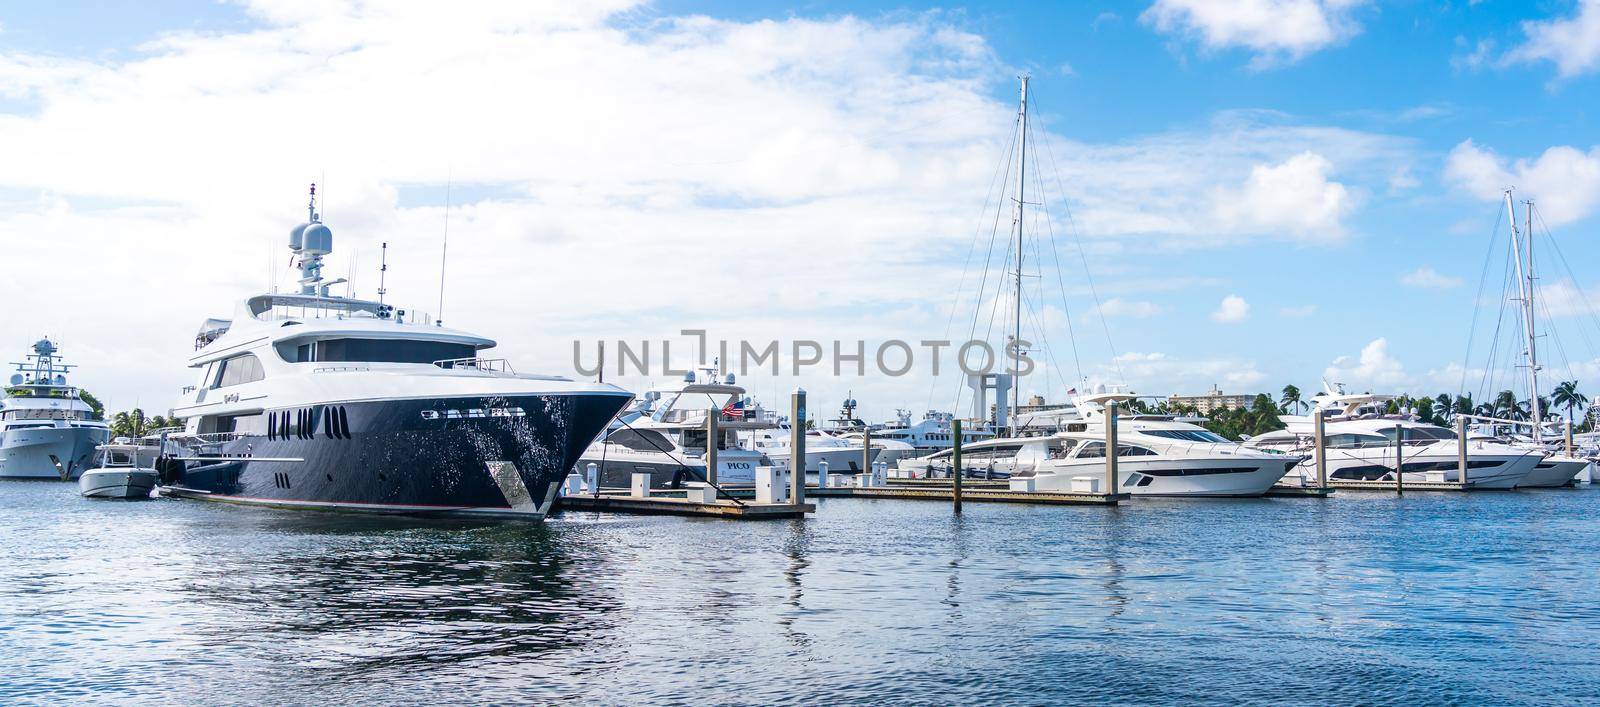 Fort Lauderdale, Florida, USA - September 20, 2019: Luxury yachts docked in marina in Fort Lauderdale